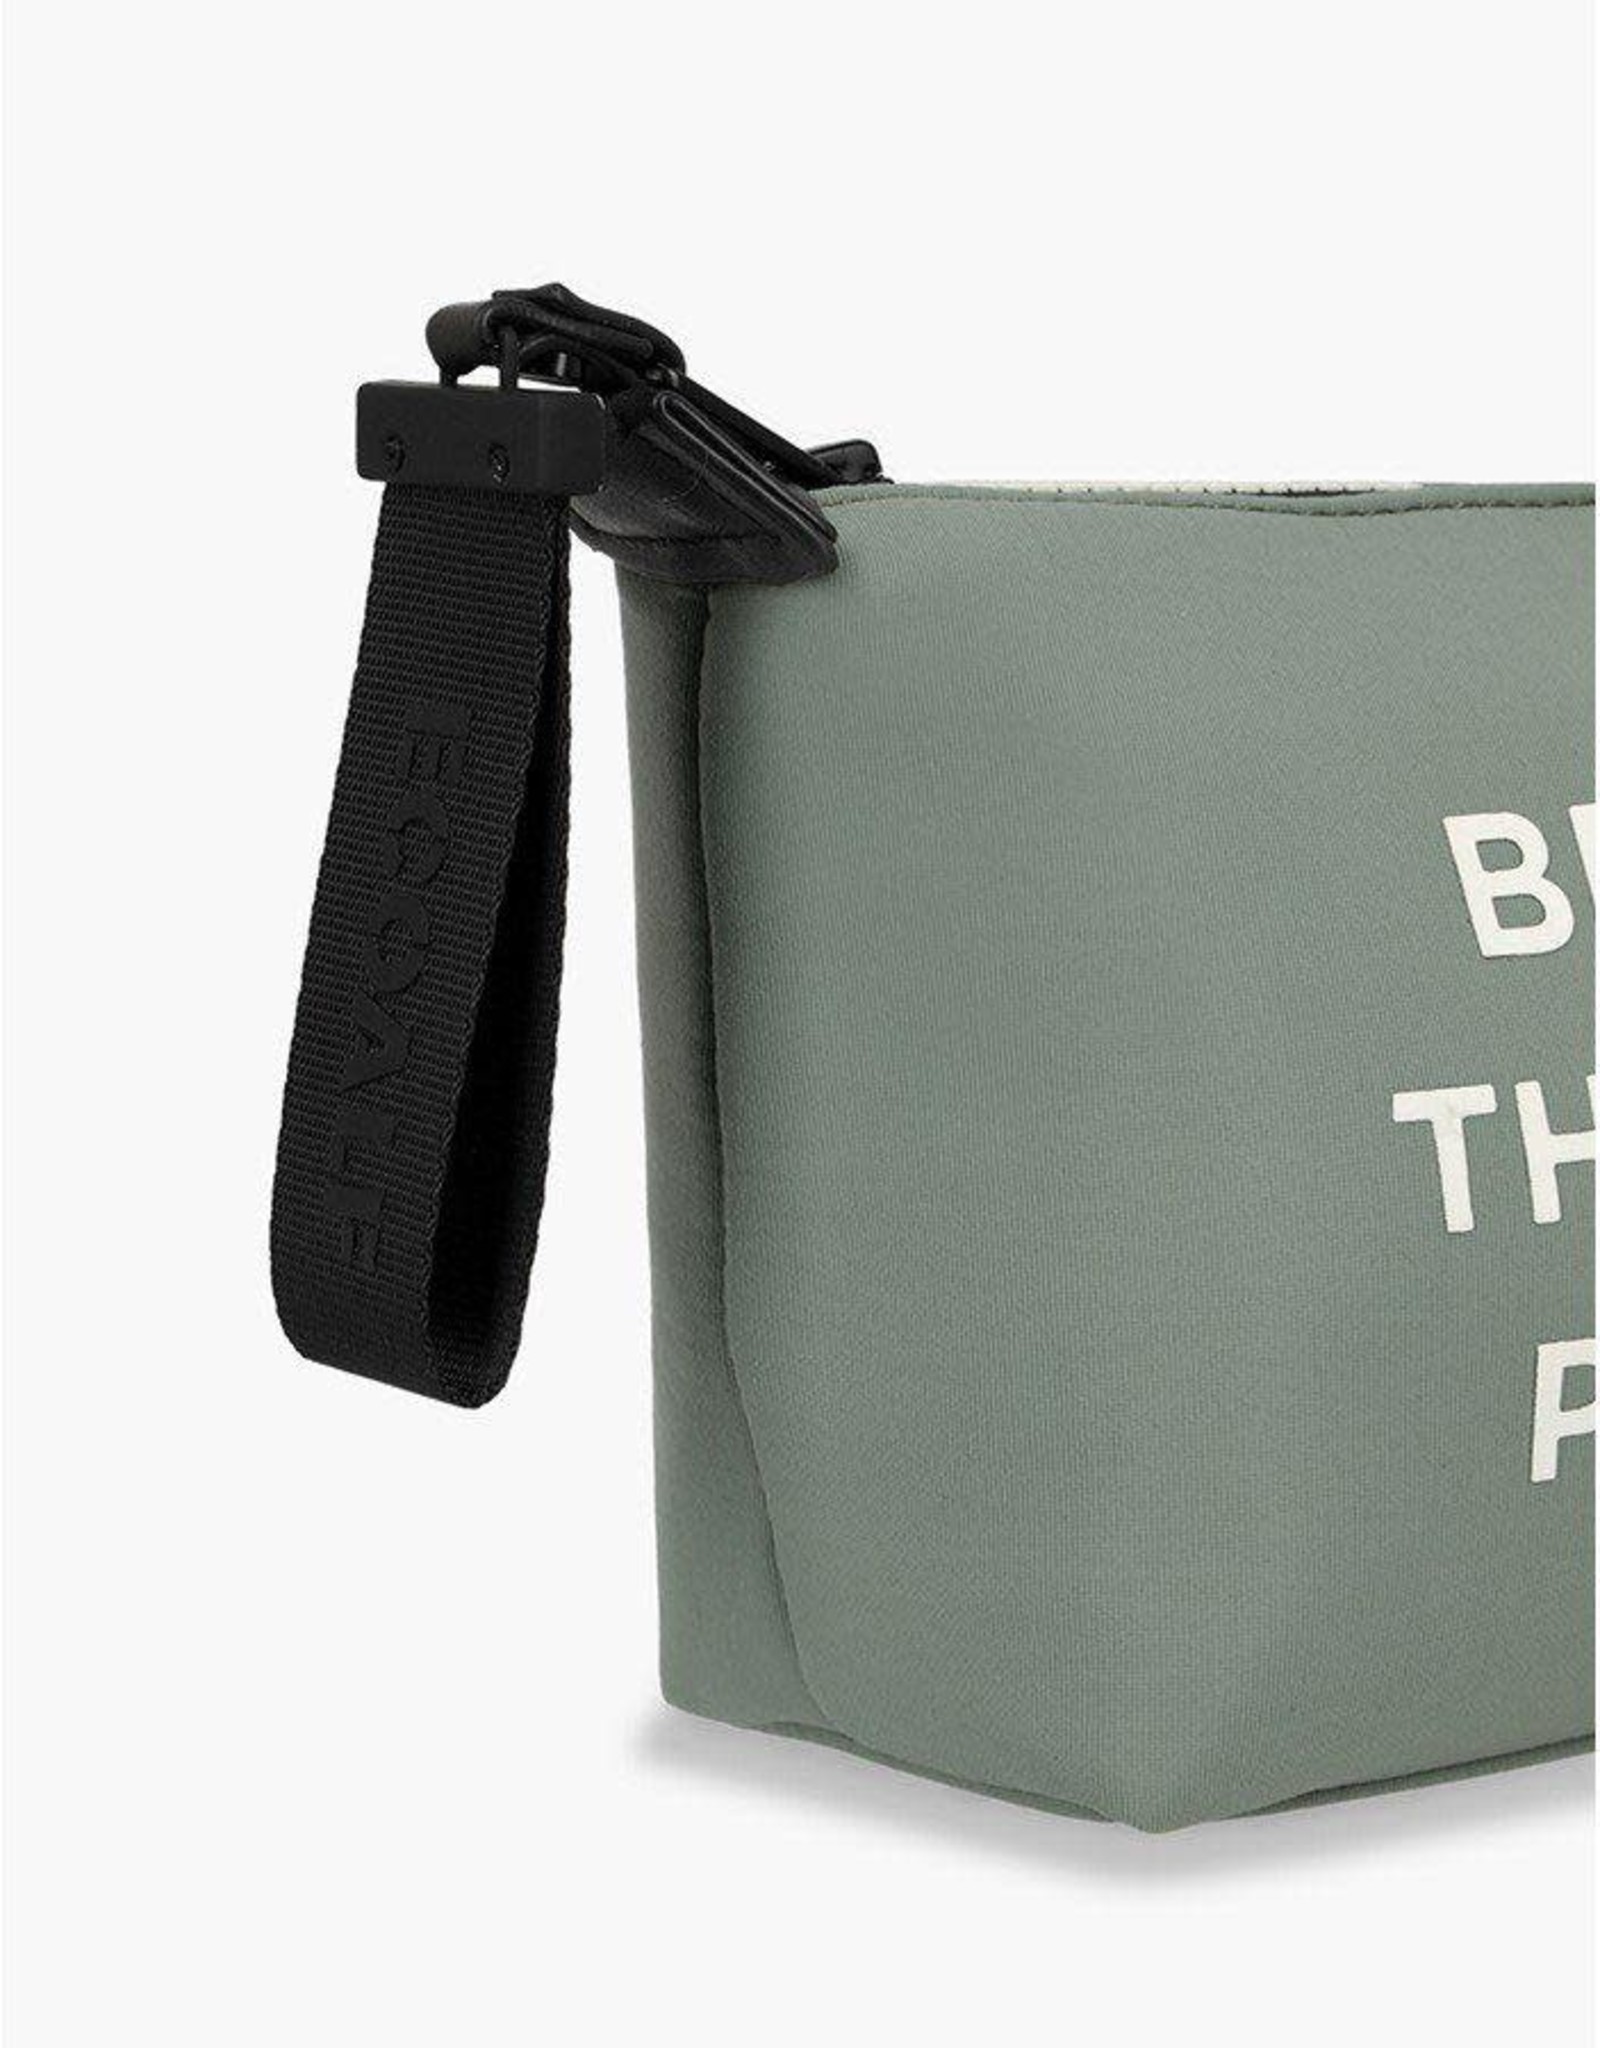 ECOALF VANITY BAG/CASE FROM ECOALF "THERE IS NO PLANet B".